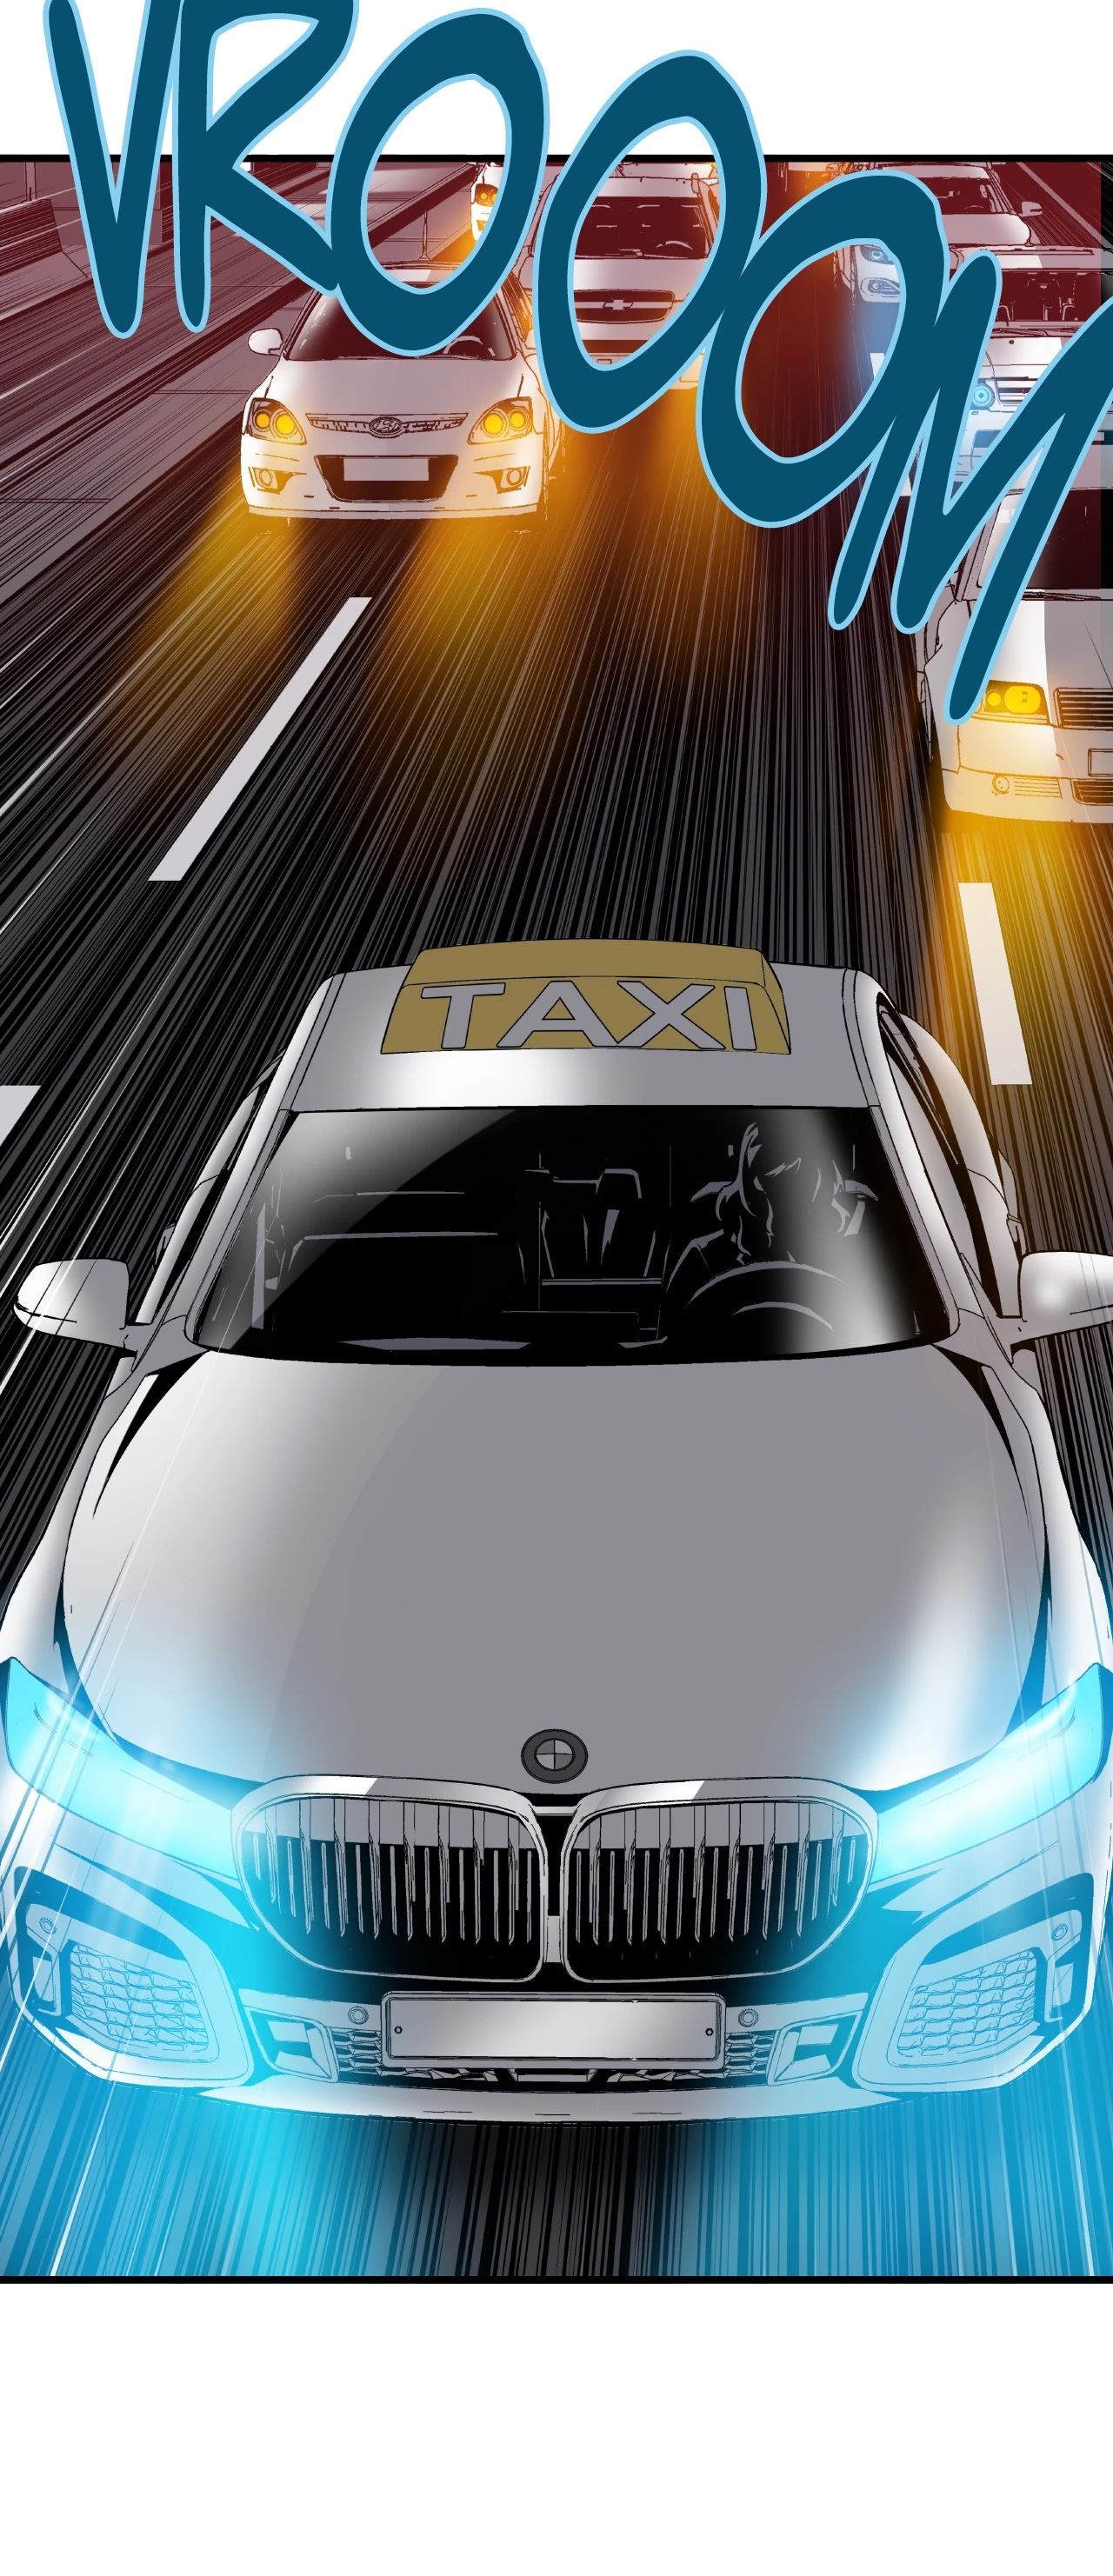 Midnight Taxi image